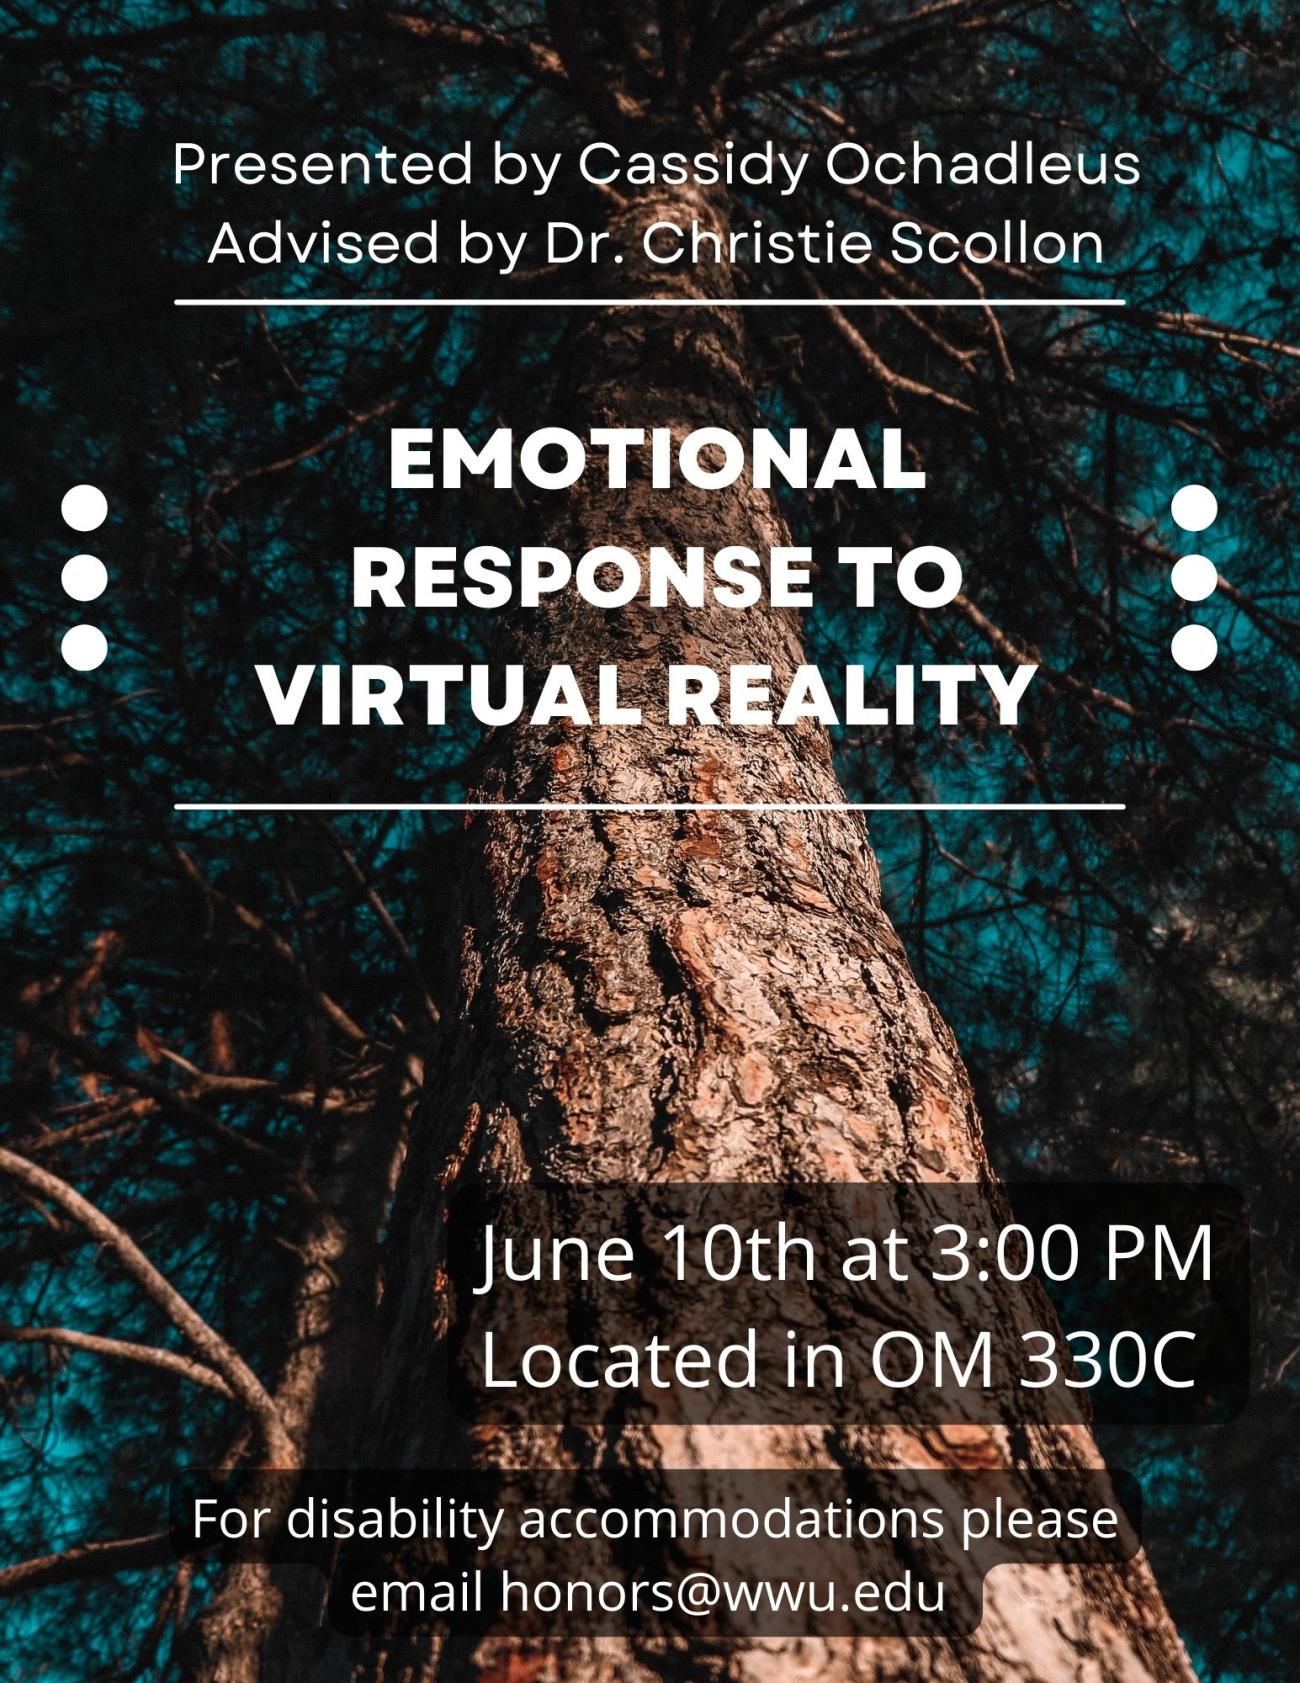 A poster with a picture of a tall evergreen tree, taken from the base of the tree looking up. The text reads: “Emotional Response to Virtual Reality. Presented by Cassidy Ochadleus, Advised by Dr. Christie Scollon. June 10th at 3:00 PM, Located in OM 330C. For disability accommodations please email honors@wwu.edu.”